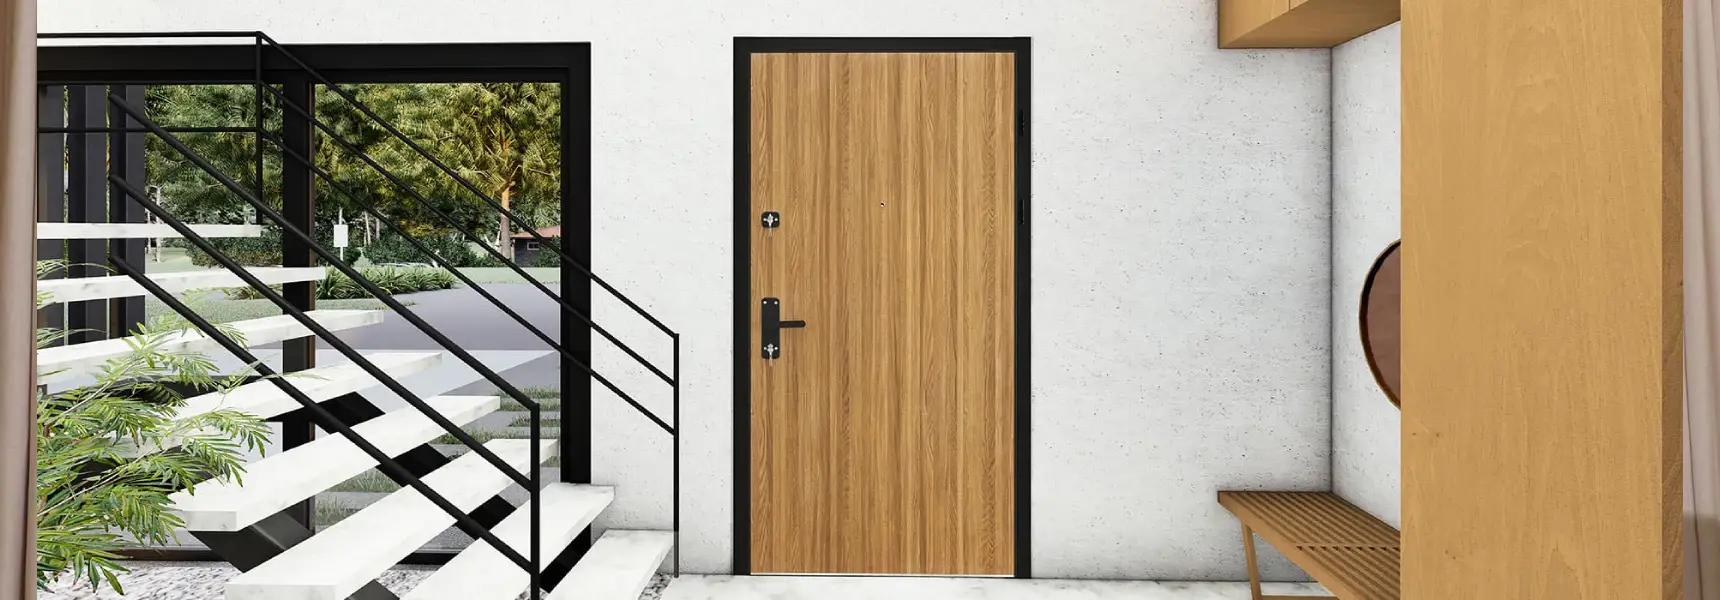 What should you pay attention to in steel security entrance doors for a safe home environment